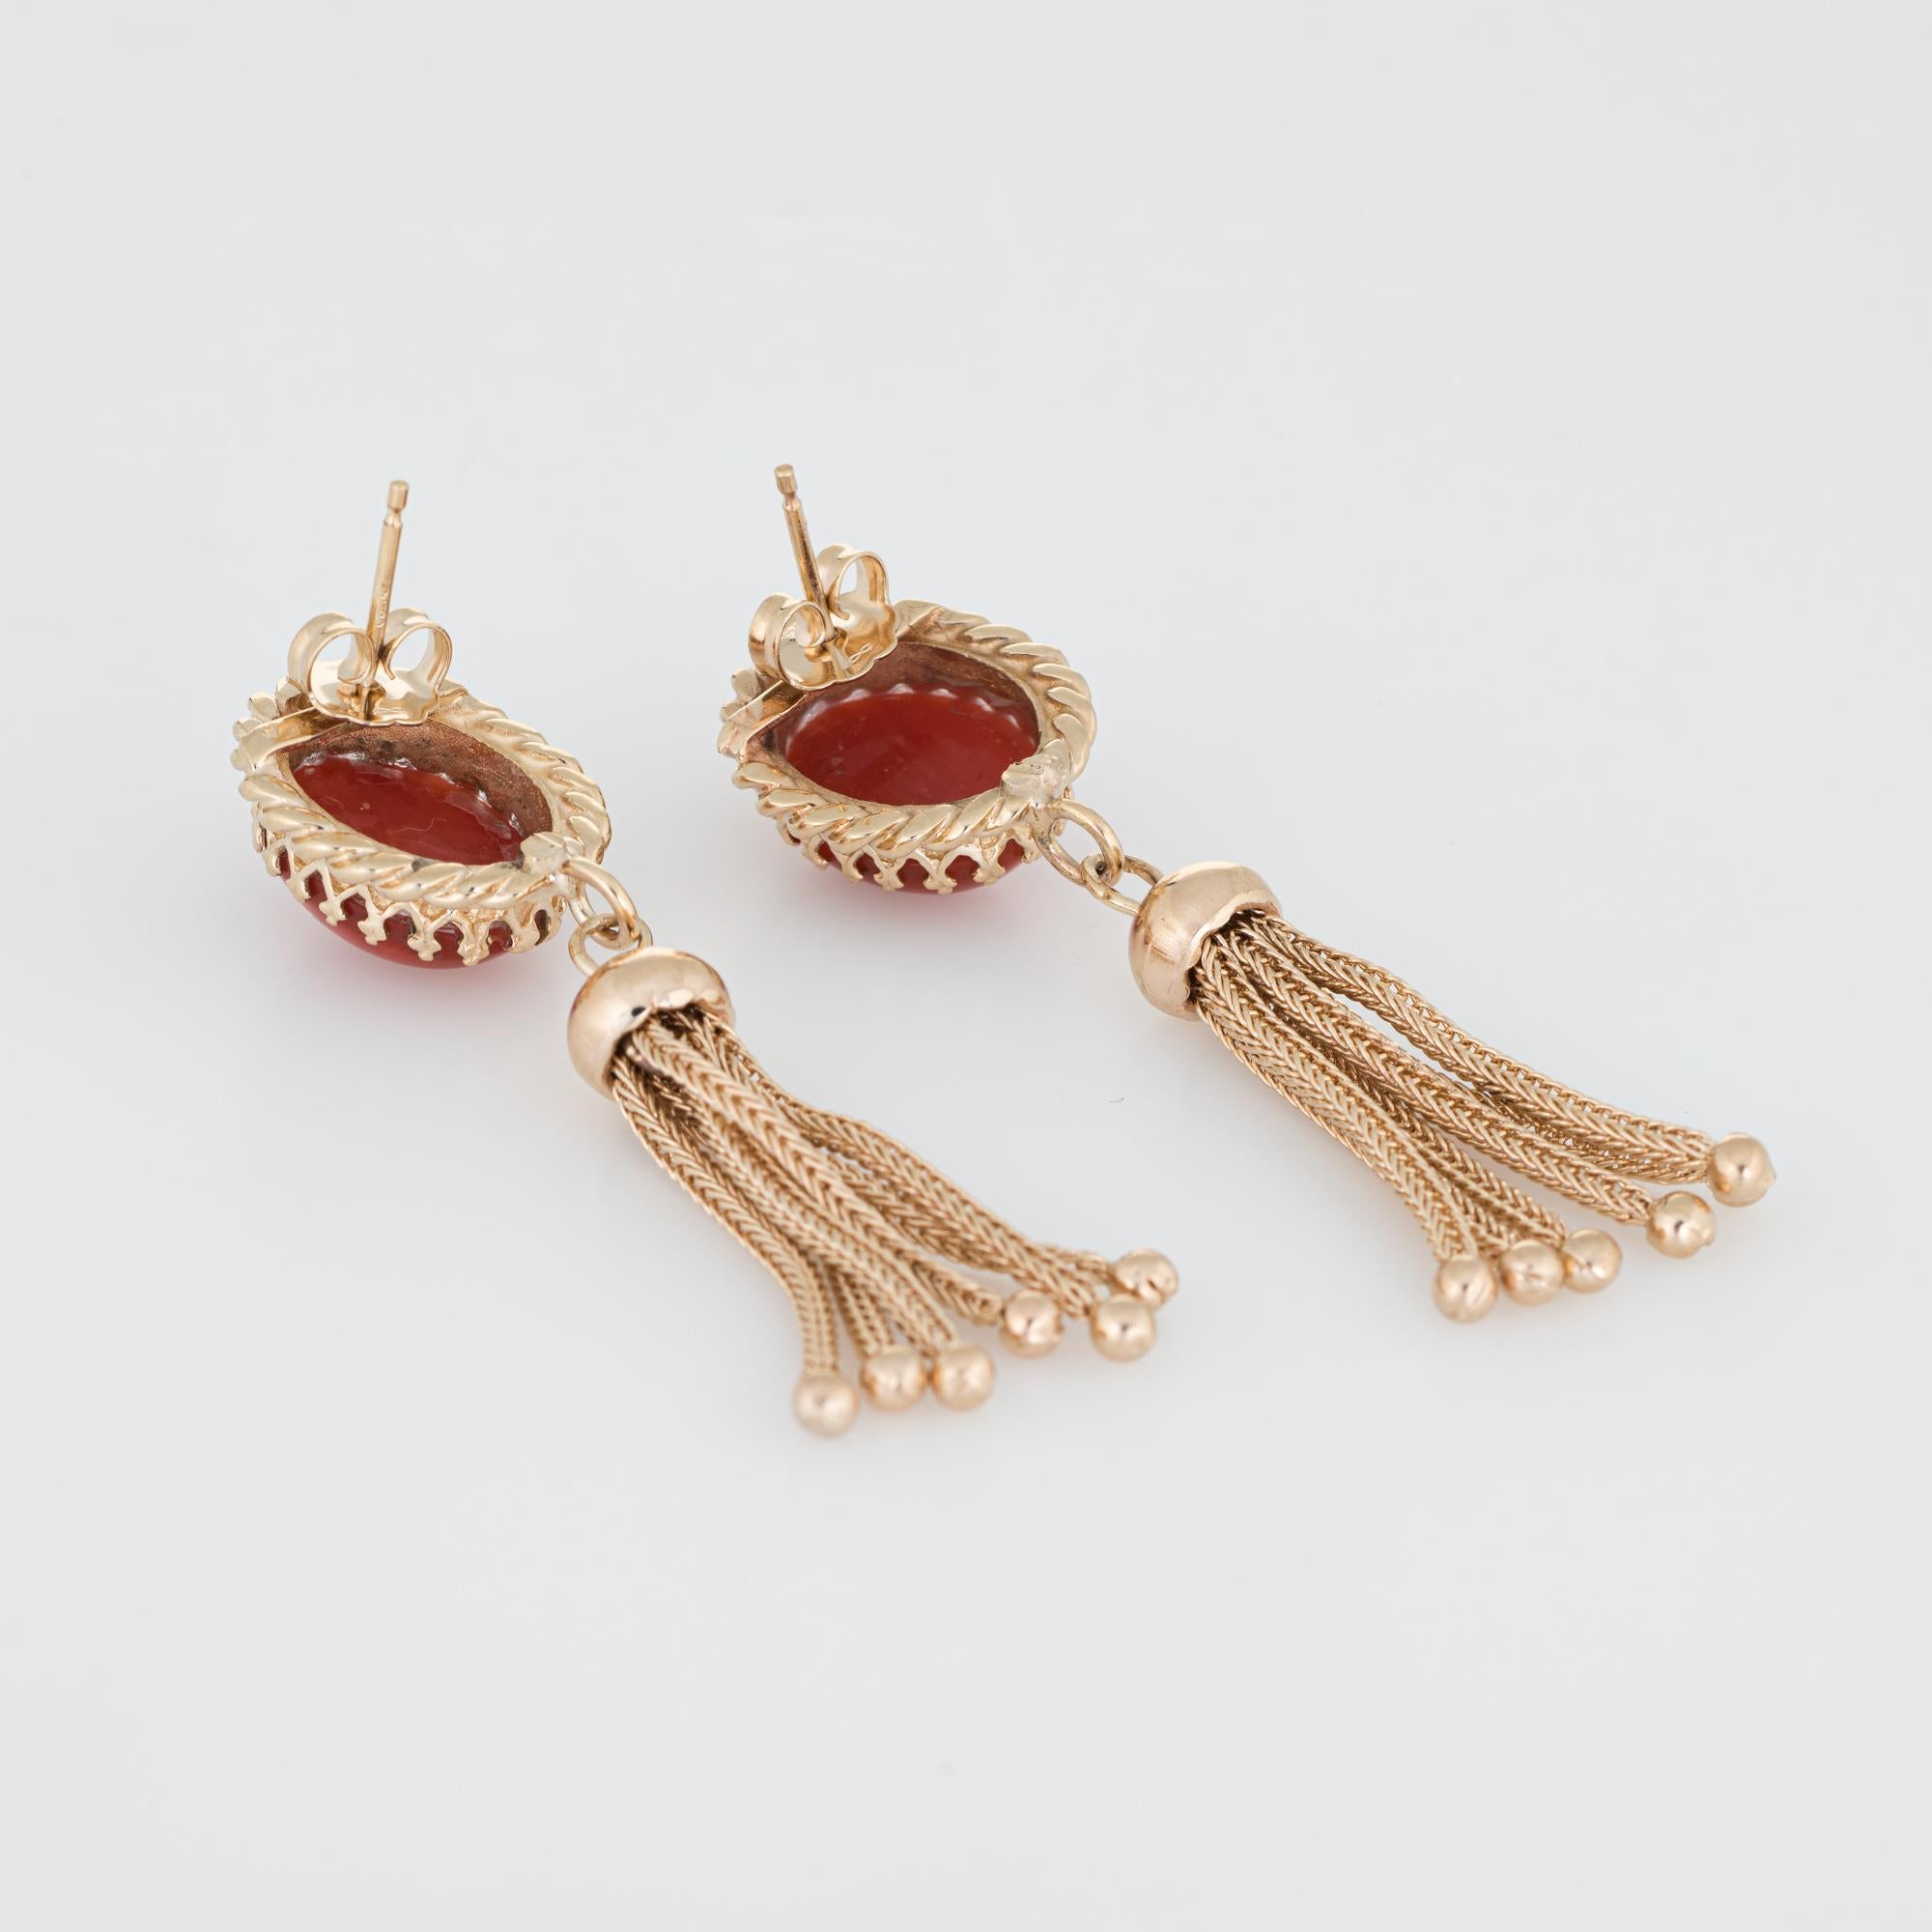 Finely detailed pair of vintage tassel earrings, crafted in 14k yellow gold. 

Mediterranean red coral each measures 12mm x 10mm (estimated at 4.50 carats each - 9 carats total estimated weight). The coral is in excellent condition and free of